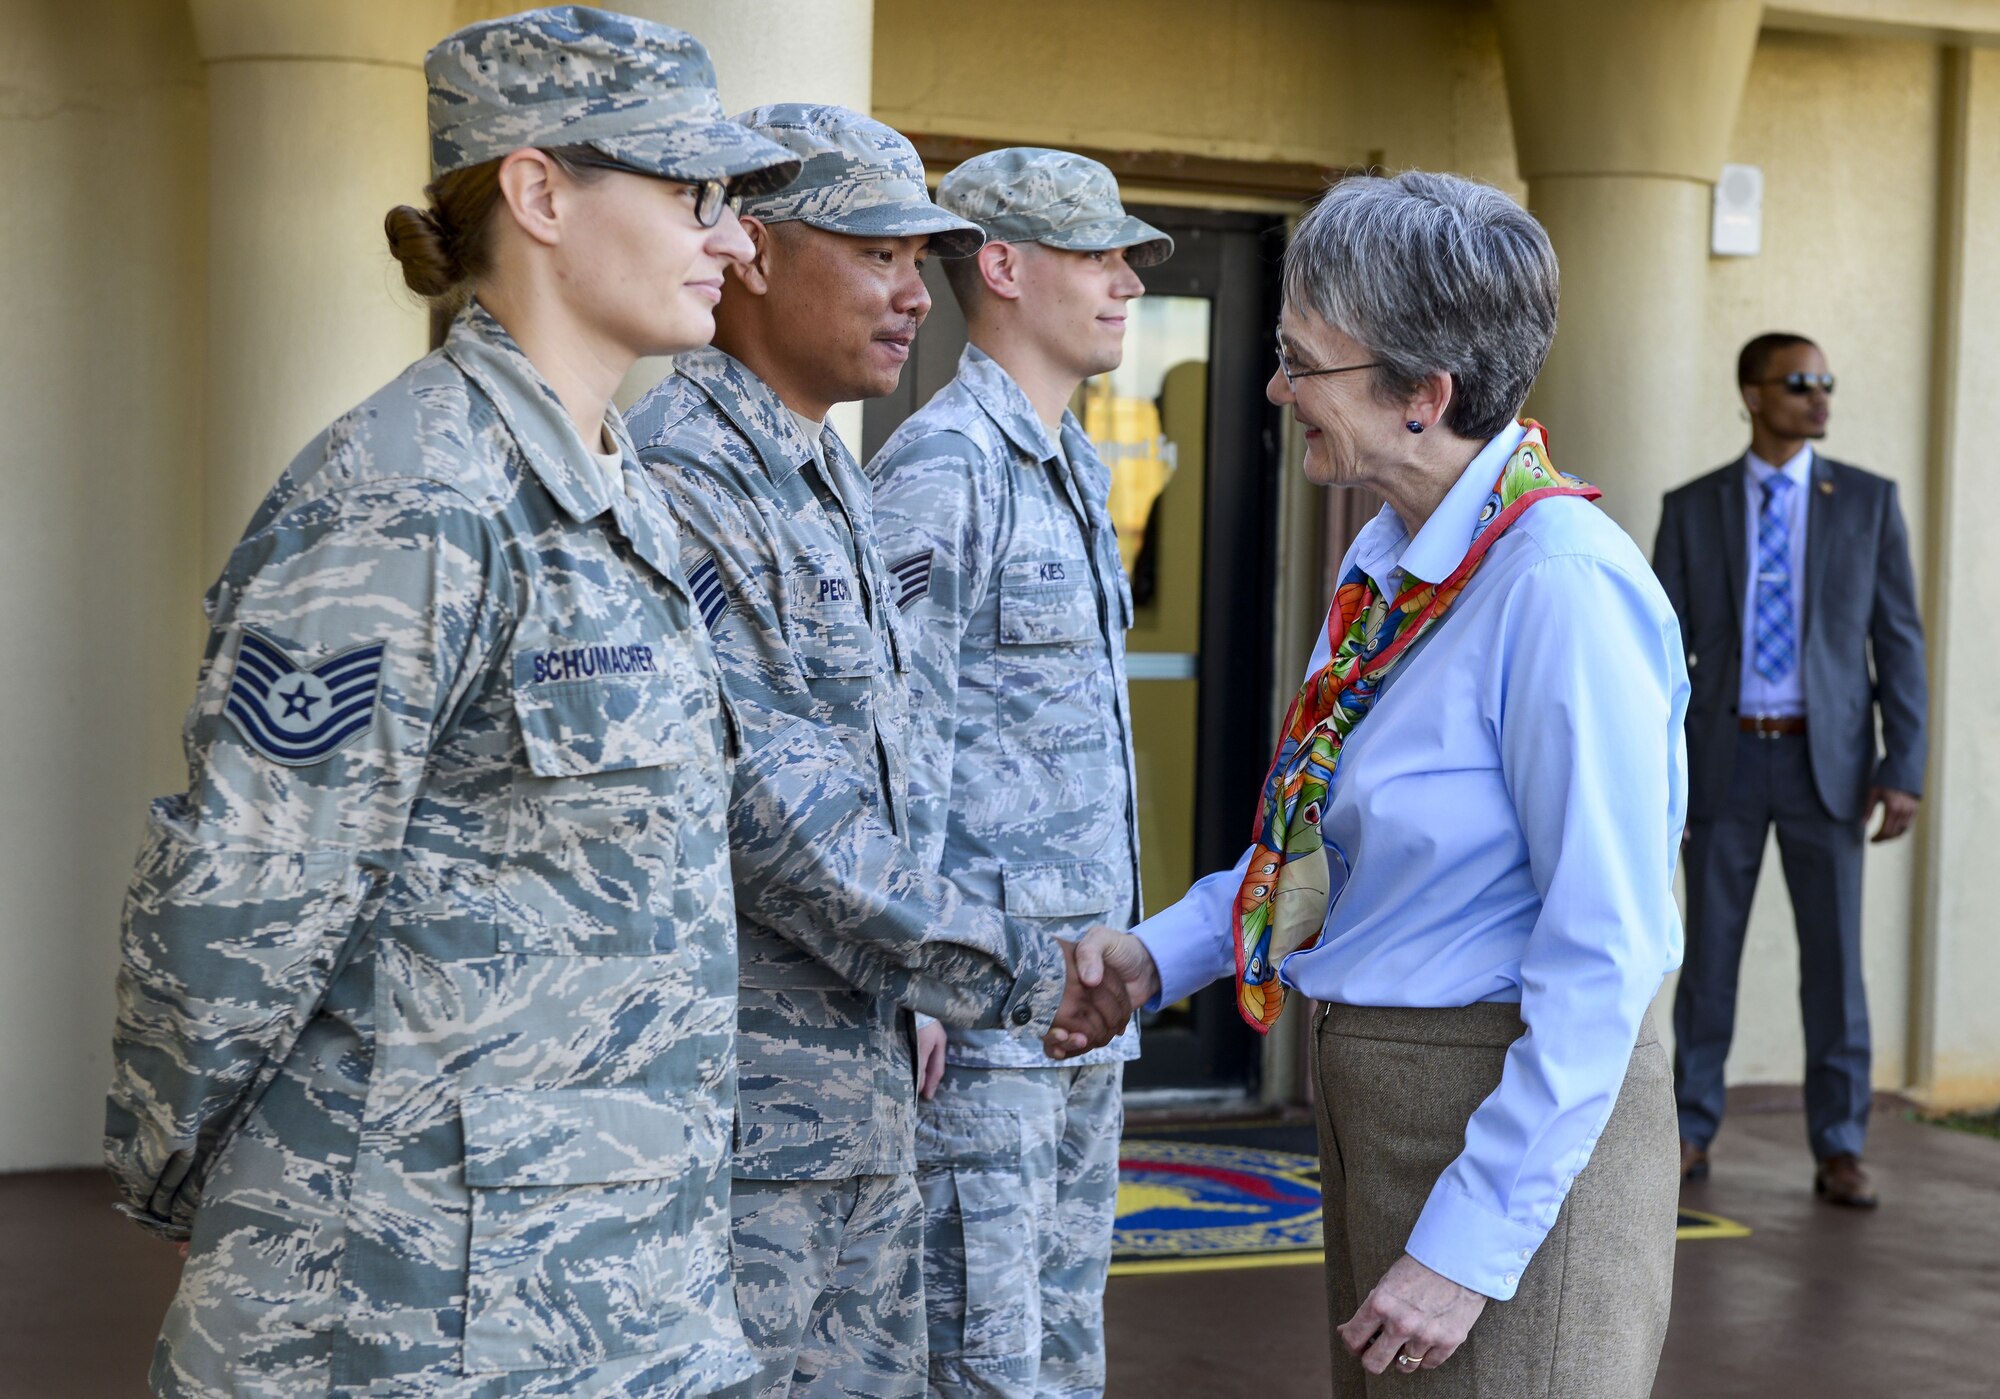 Secretary of the Air Force Heather Wilson speaks to Airmen assigned to the 36th Wing during a base visit at Andersen Air Force Base, Guam, Jan. 25, 2018. During the tour, Wilson reiterated the importance of readiness, modernization and innovations to remain the greatest Air Force in the world. (U.S. Air Force photo by Airman 1st Class Christopher Quail)